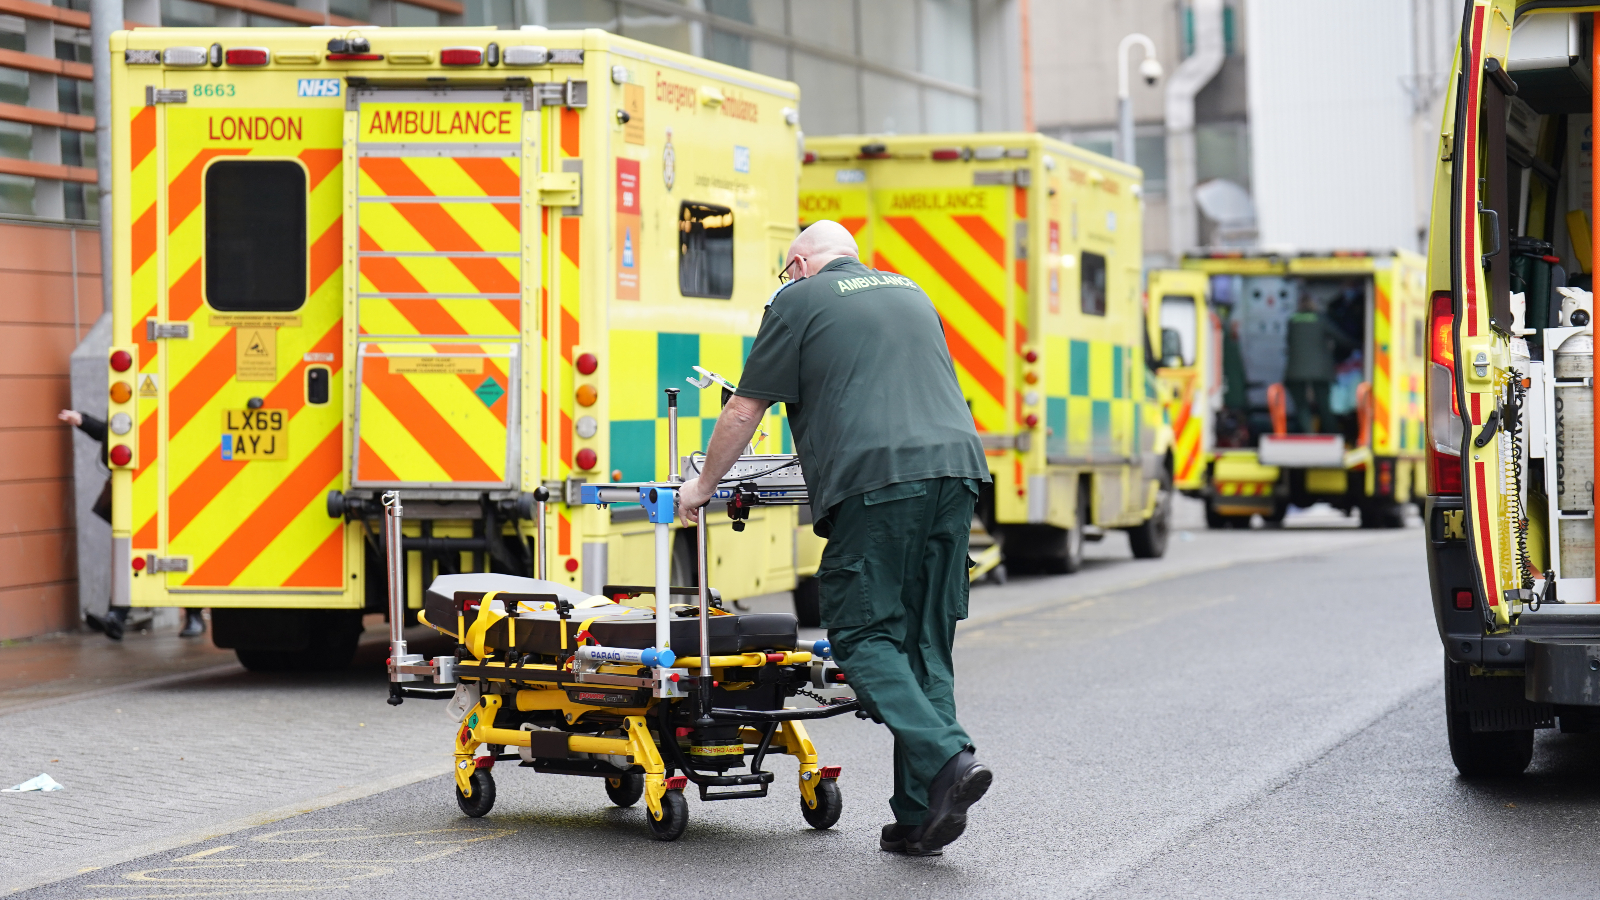 Critical incidents reported across multiple NHS and ambulance trusts in ...